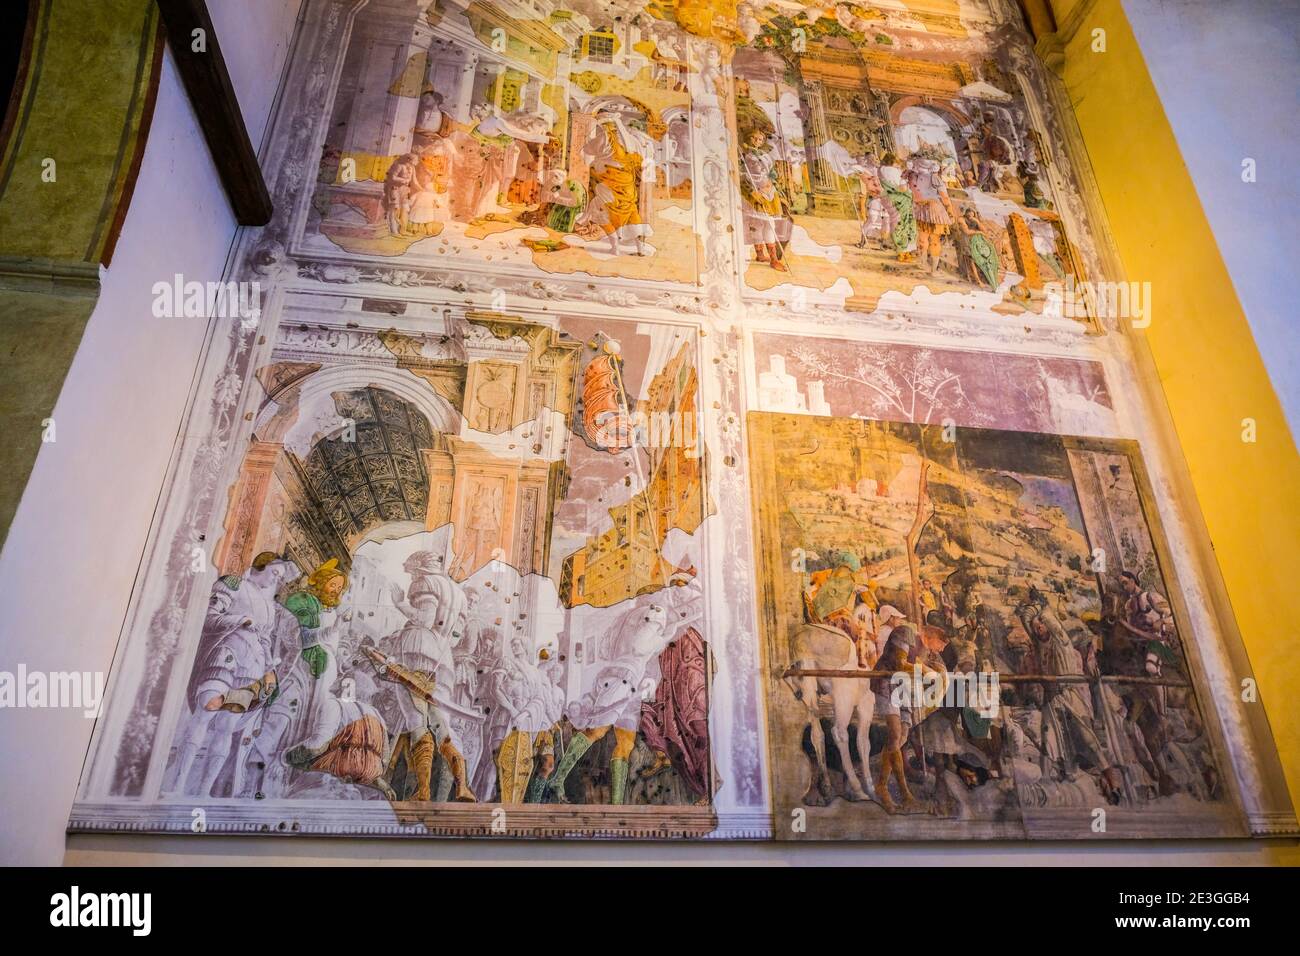 Frescoes on the walls of the Church of the Eremitani in Padua Italy Stock Photo